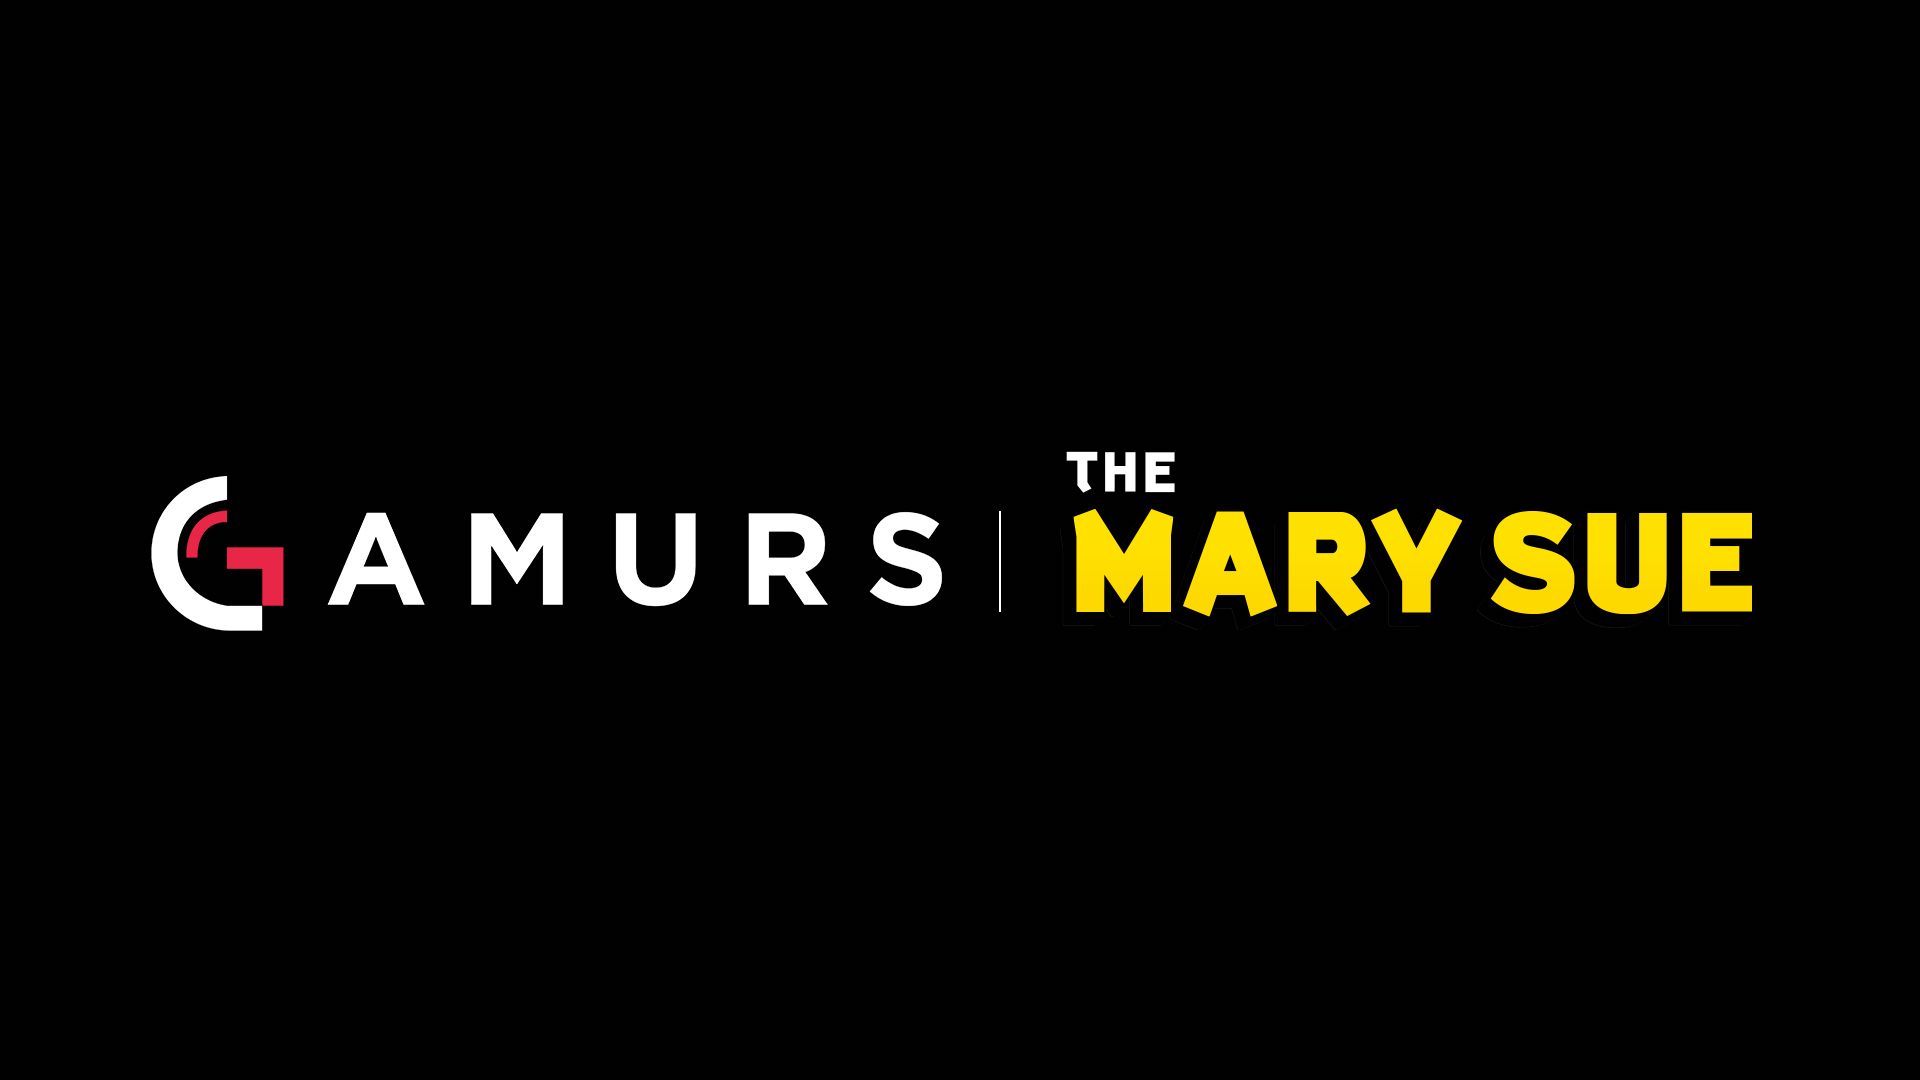 Gamurs and The Mary Sue logo text.